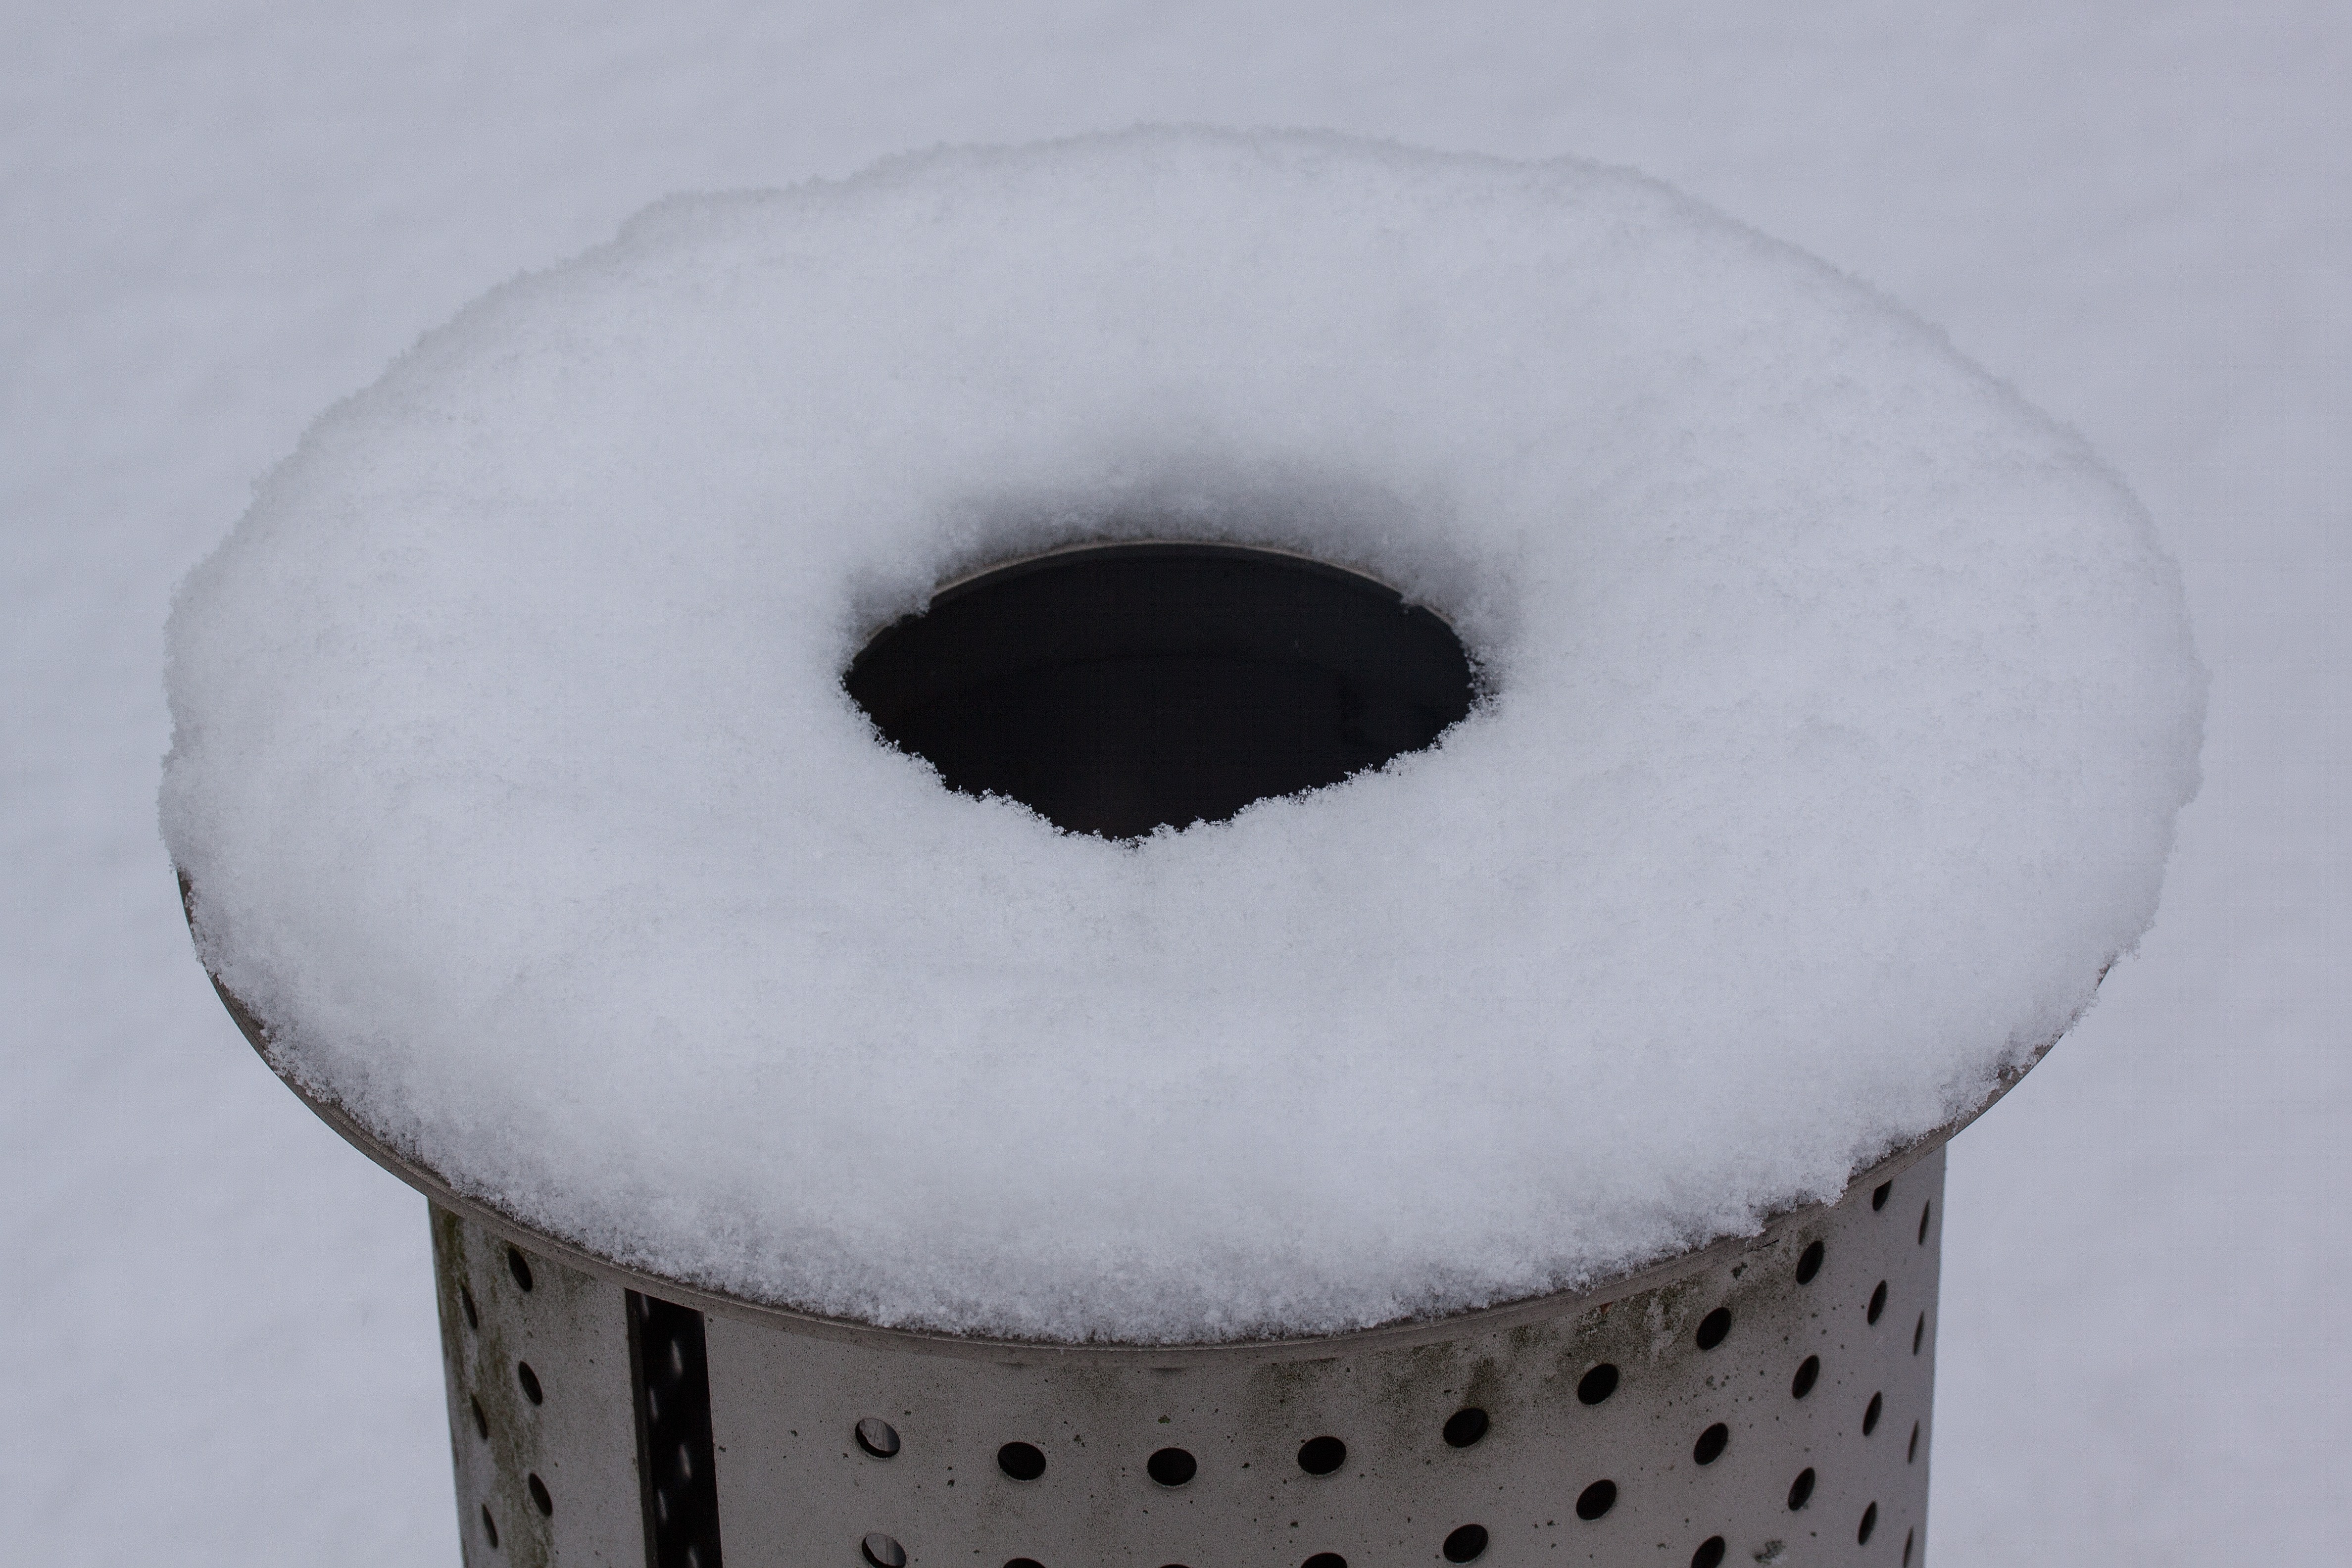 round tubular hole gray metal covered on snow